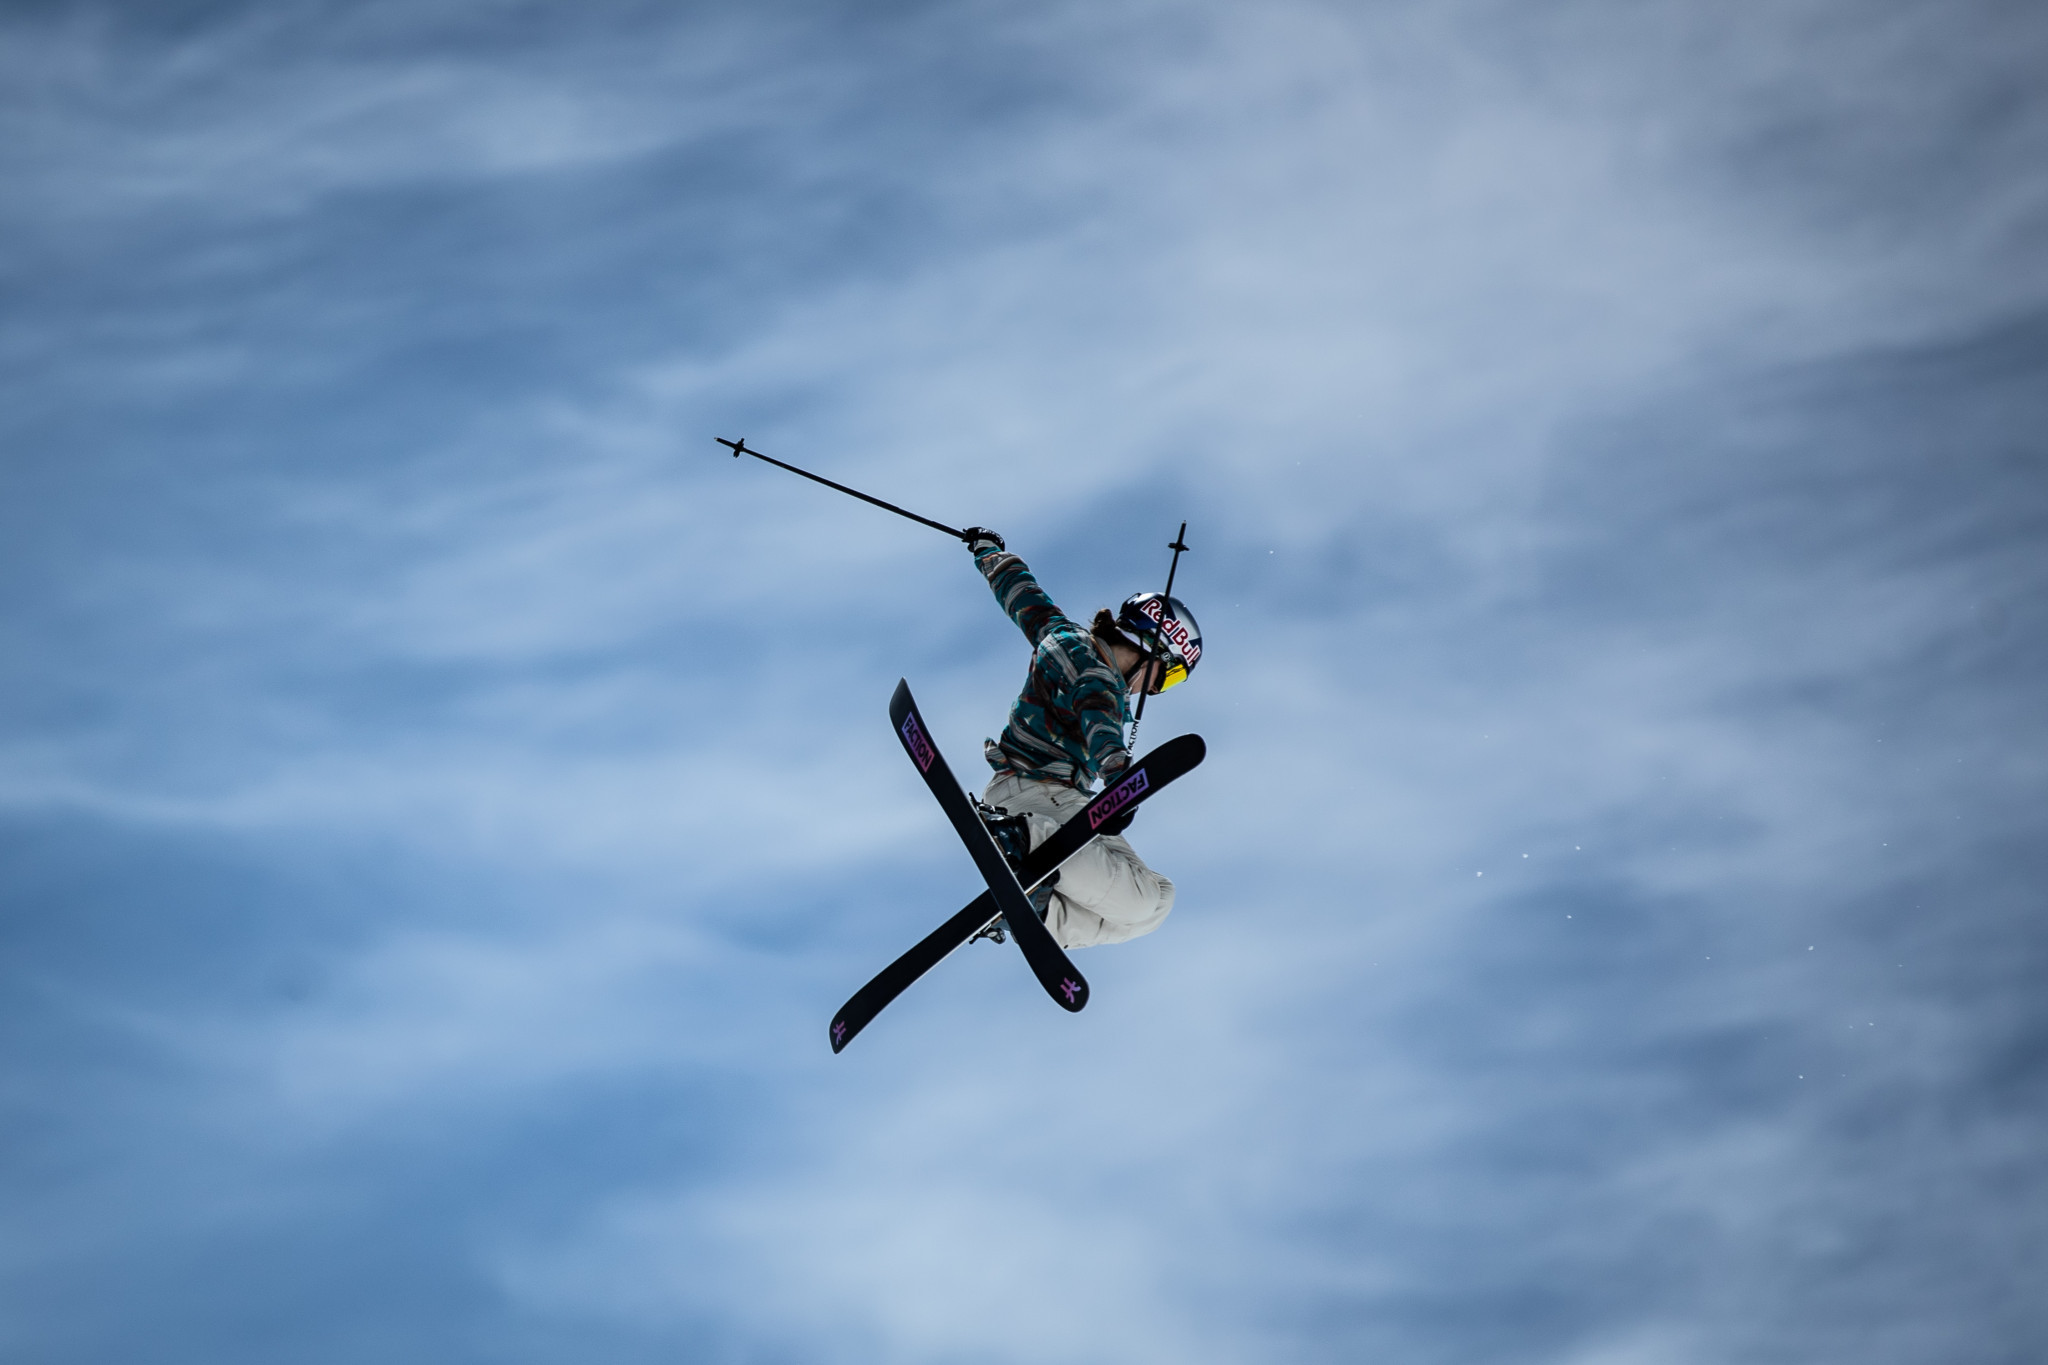 Gremaud tops qualifying at Stubai slopestyle World Cup